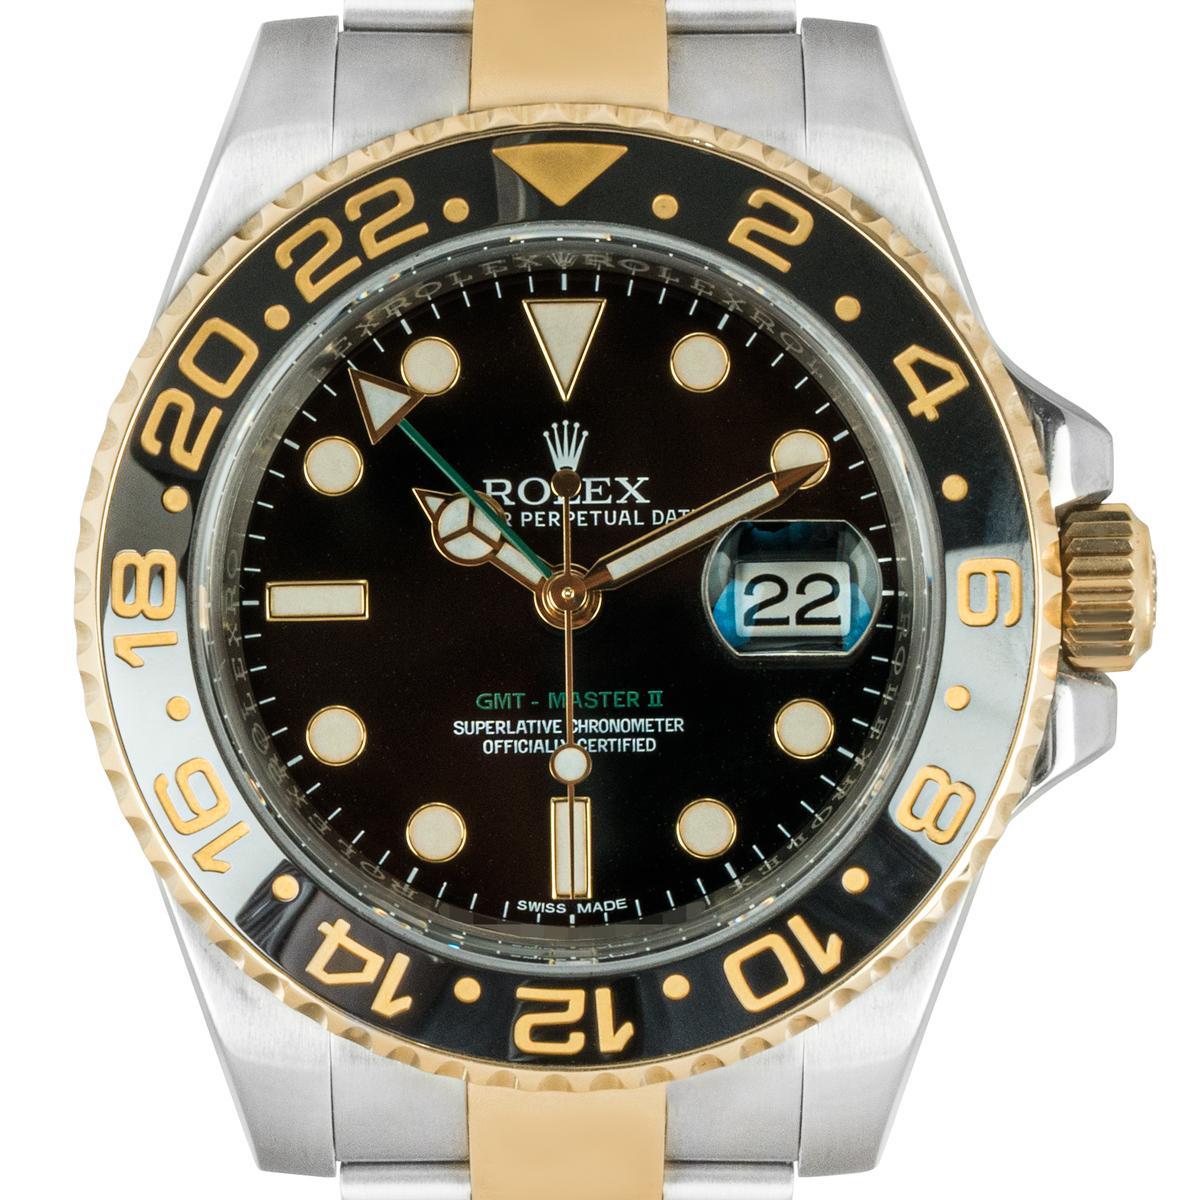 A GMT-Master II in stainless steel and yellow gold by Rolex. Featuring a black dial with a date aperture and a green second-time zone hand. The bidirectional rotatable bezel features a 24-hour display. Equipped with an Oyster bracelet and an